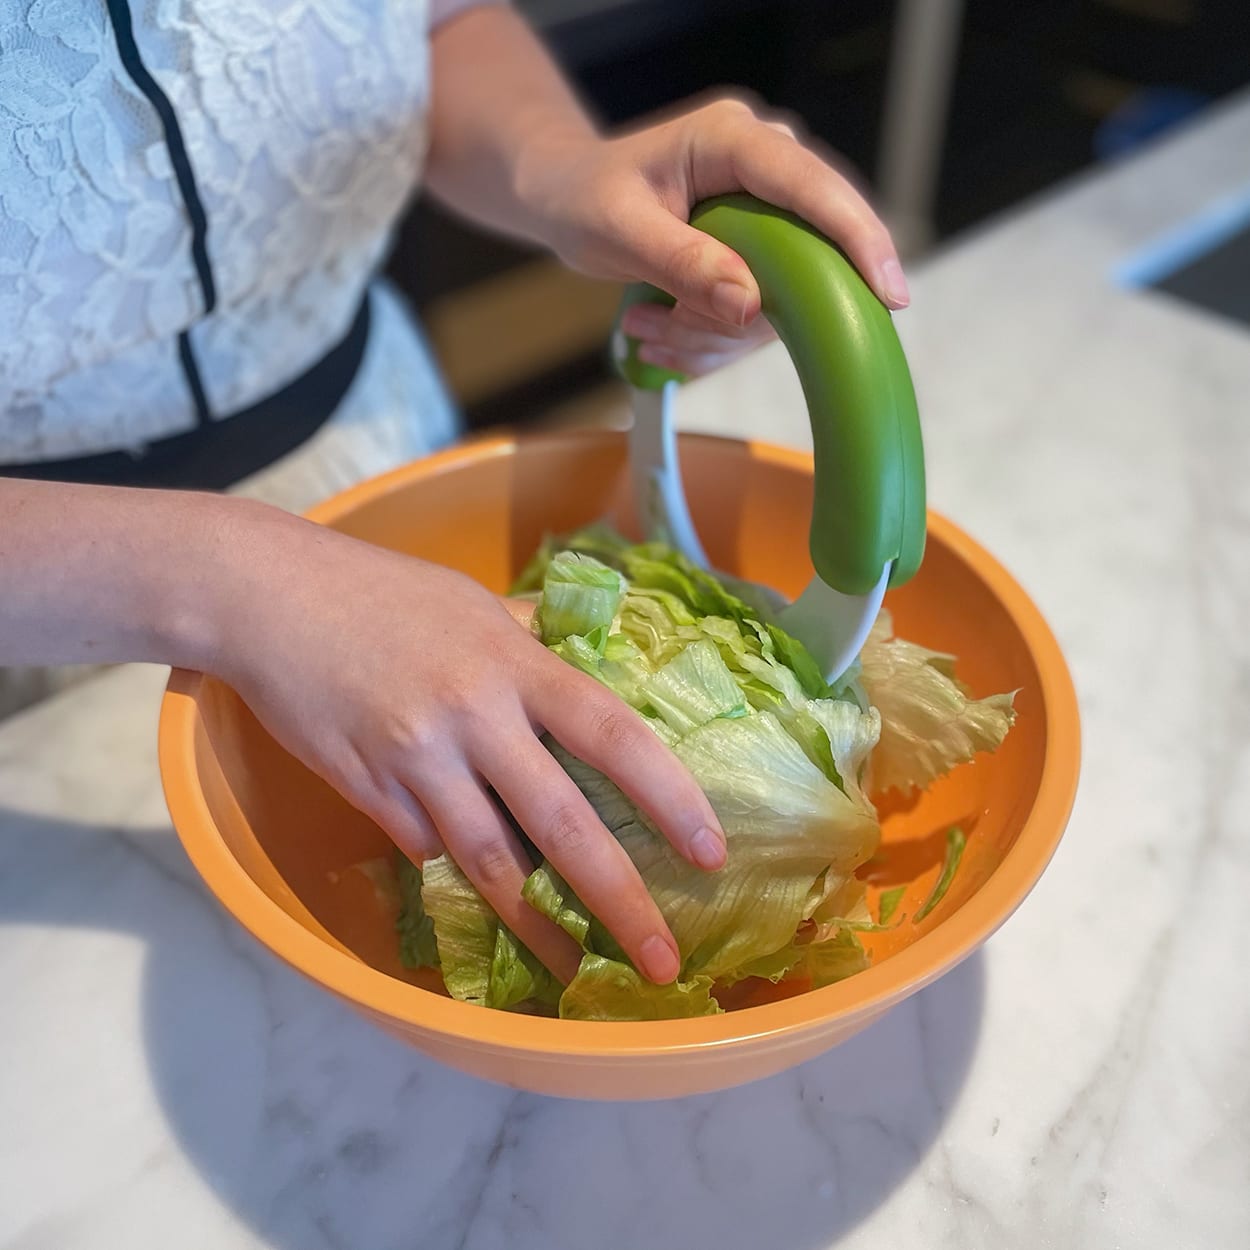 This lettuce chopper makes everything into bite size pieces so you get